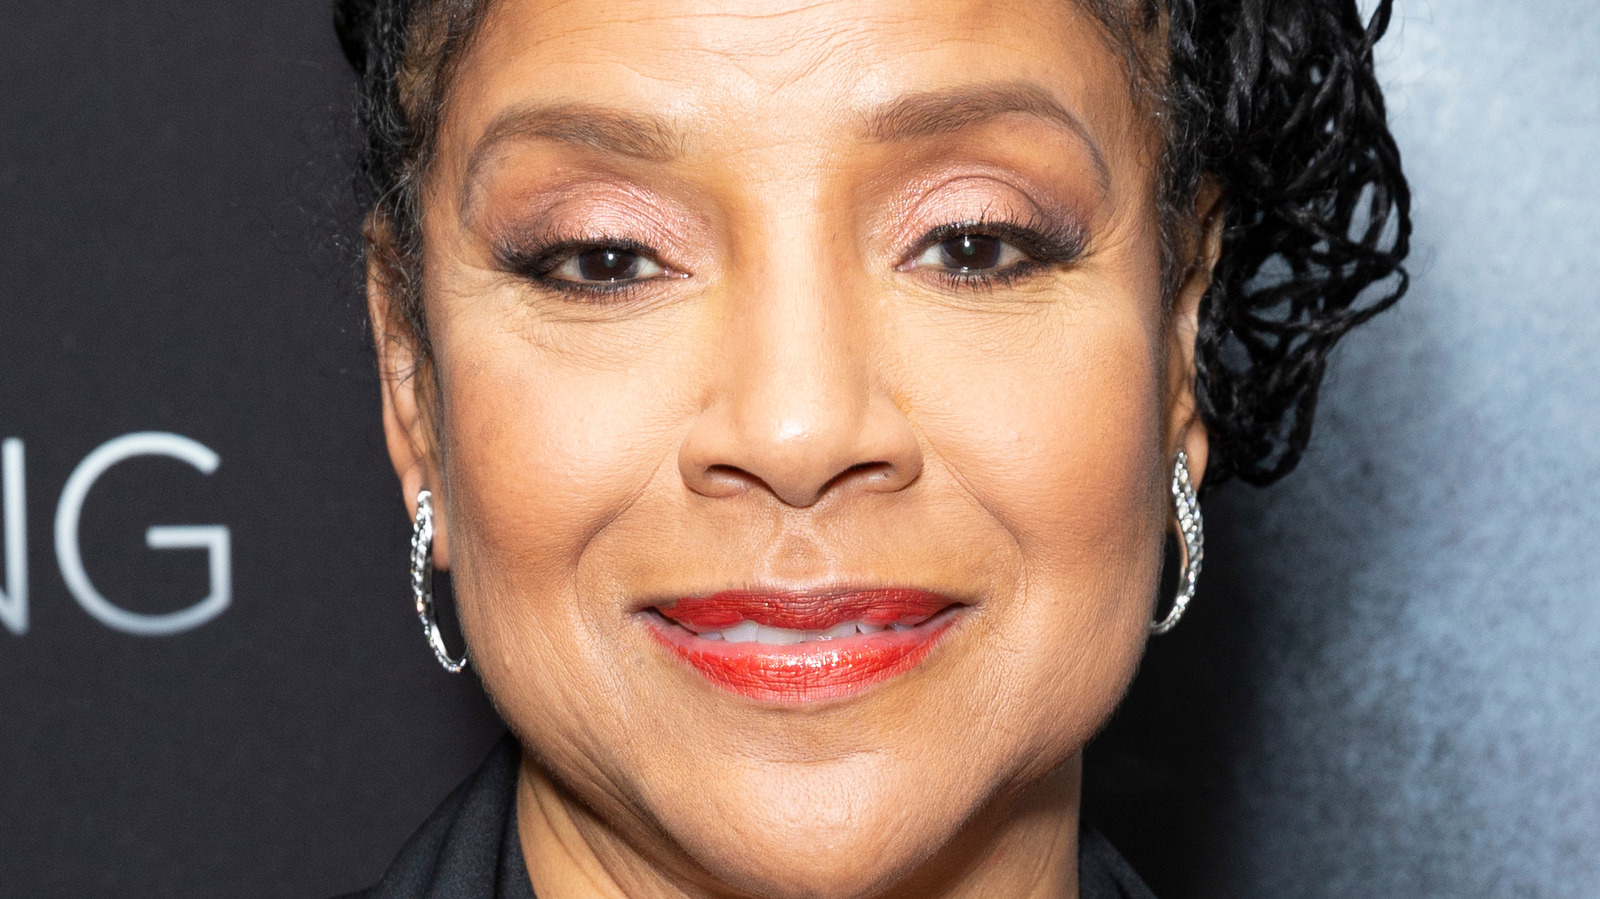 Phylicia Rashad, who played Bill Cosby's wife on "The Cosby S...